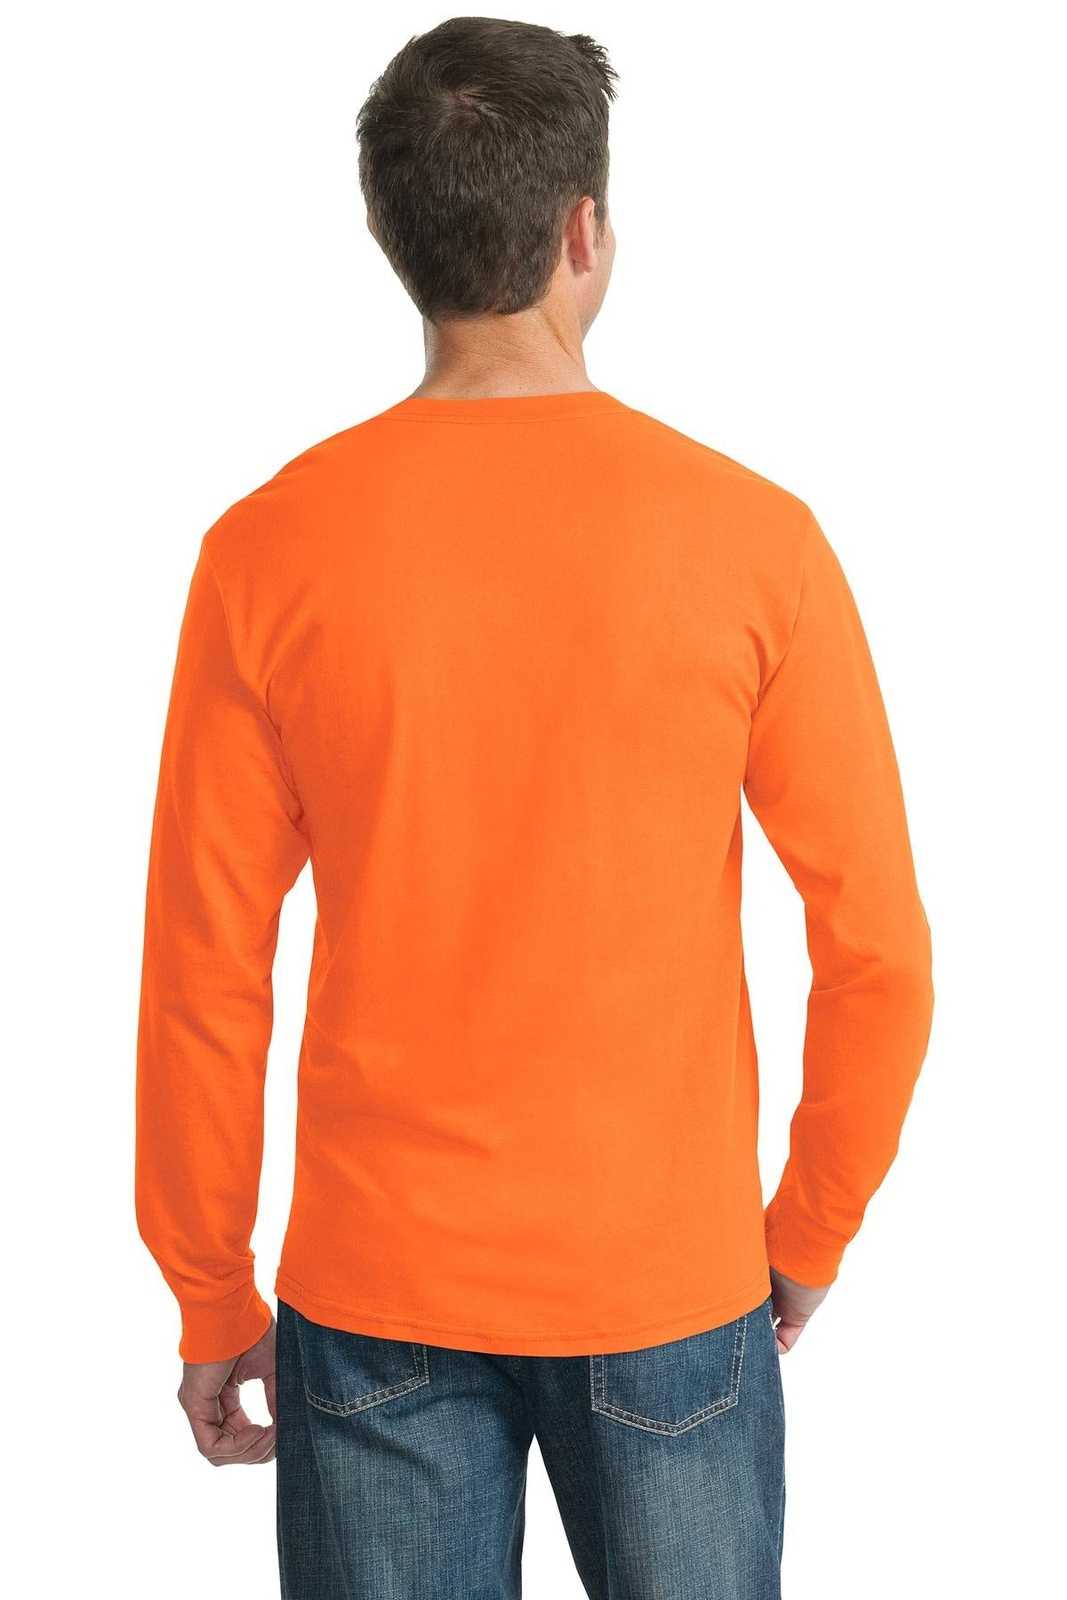 Jerzees 29LS Dri-Power 50/50 Cotton/Poly Long Sleeve T-Shirt - Safety Orange - HIT a Double